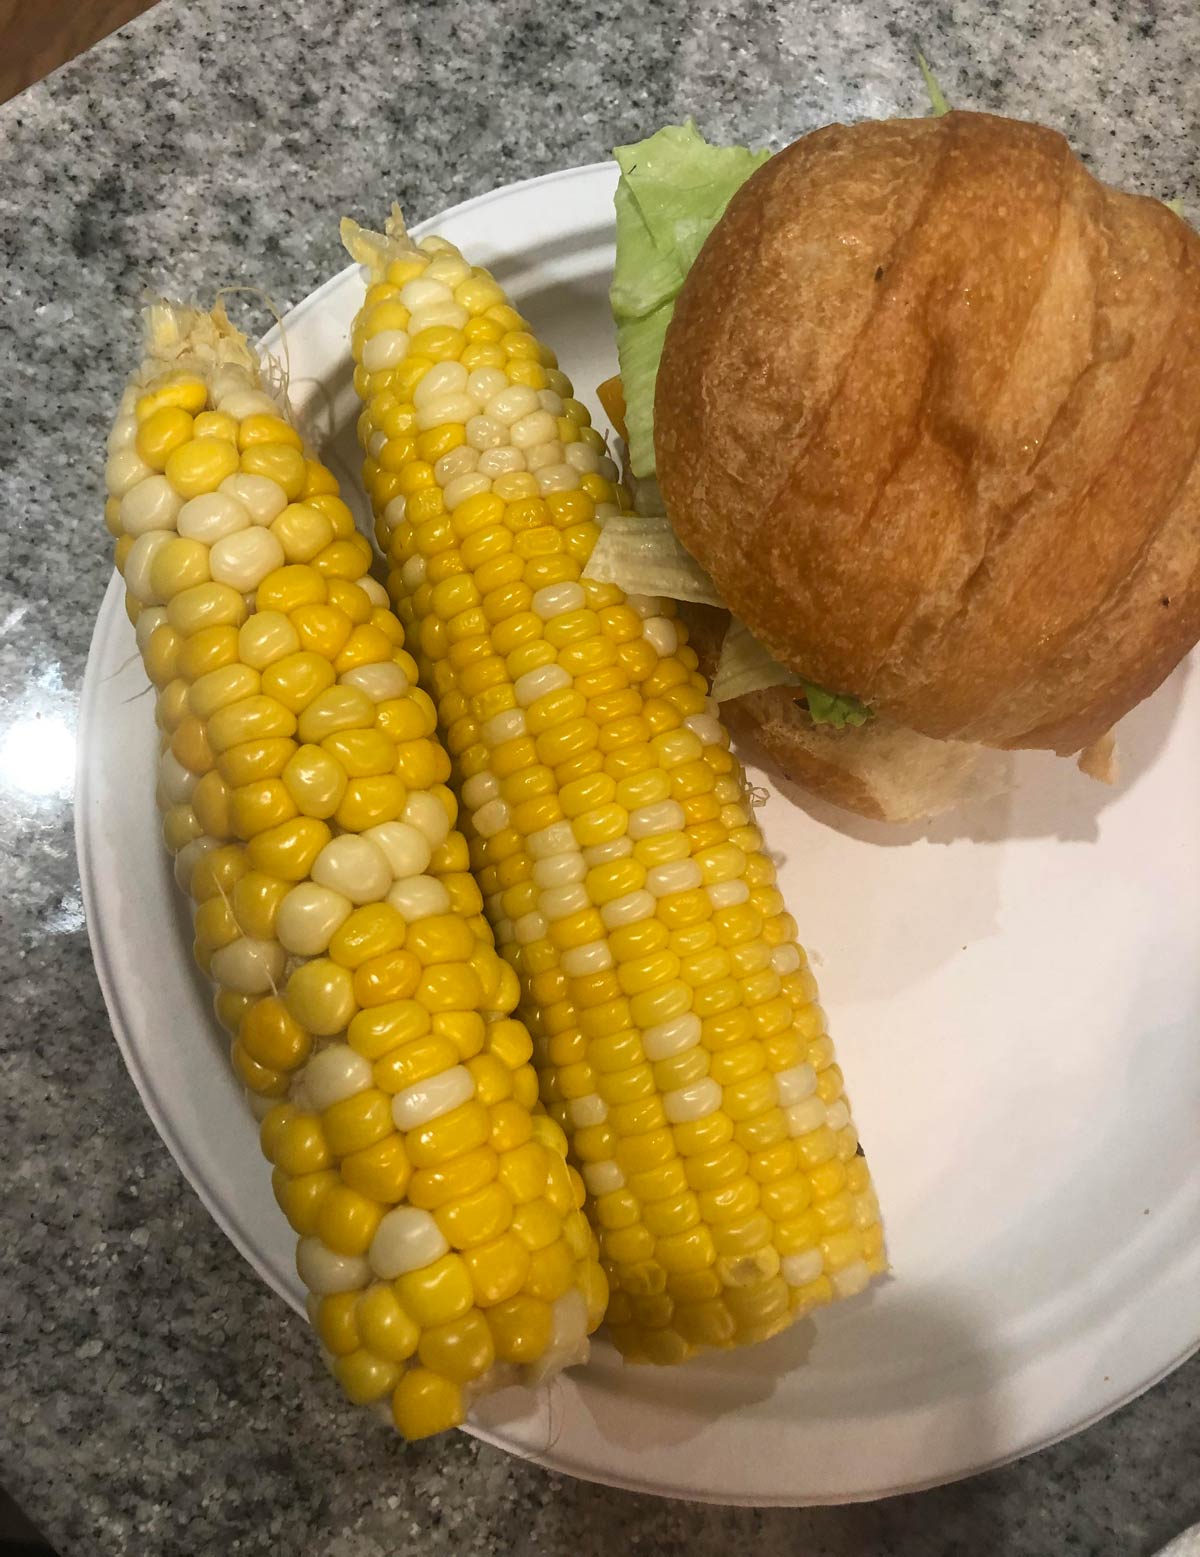 Ladies and gentlemen, on the right.. corn, on the left corn on drugs